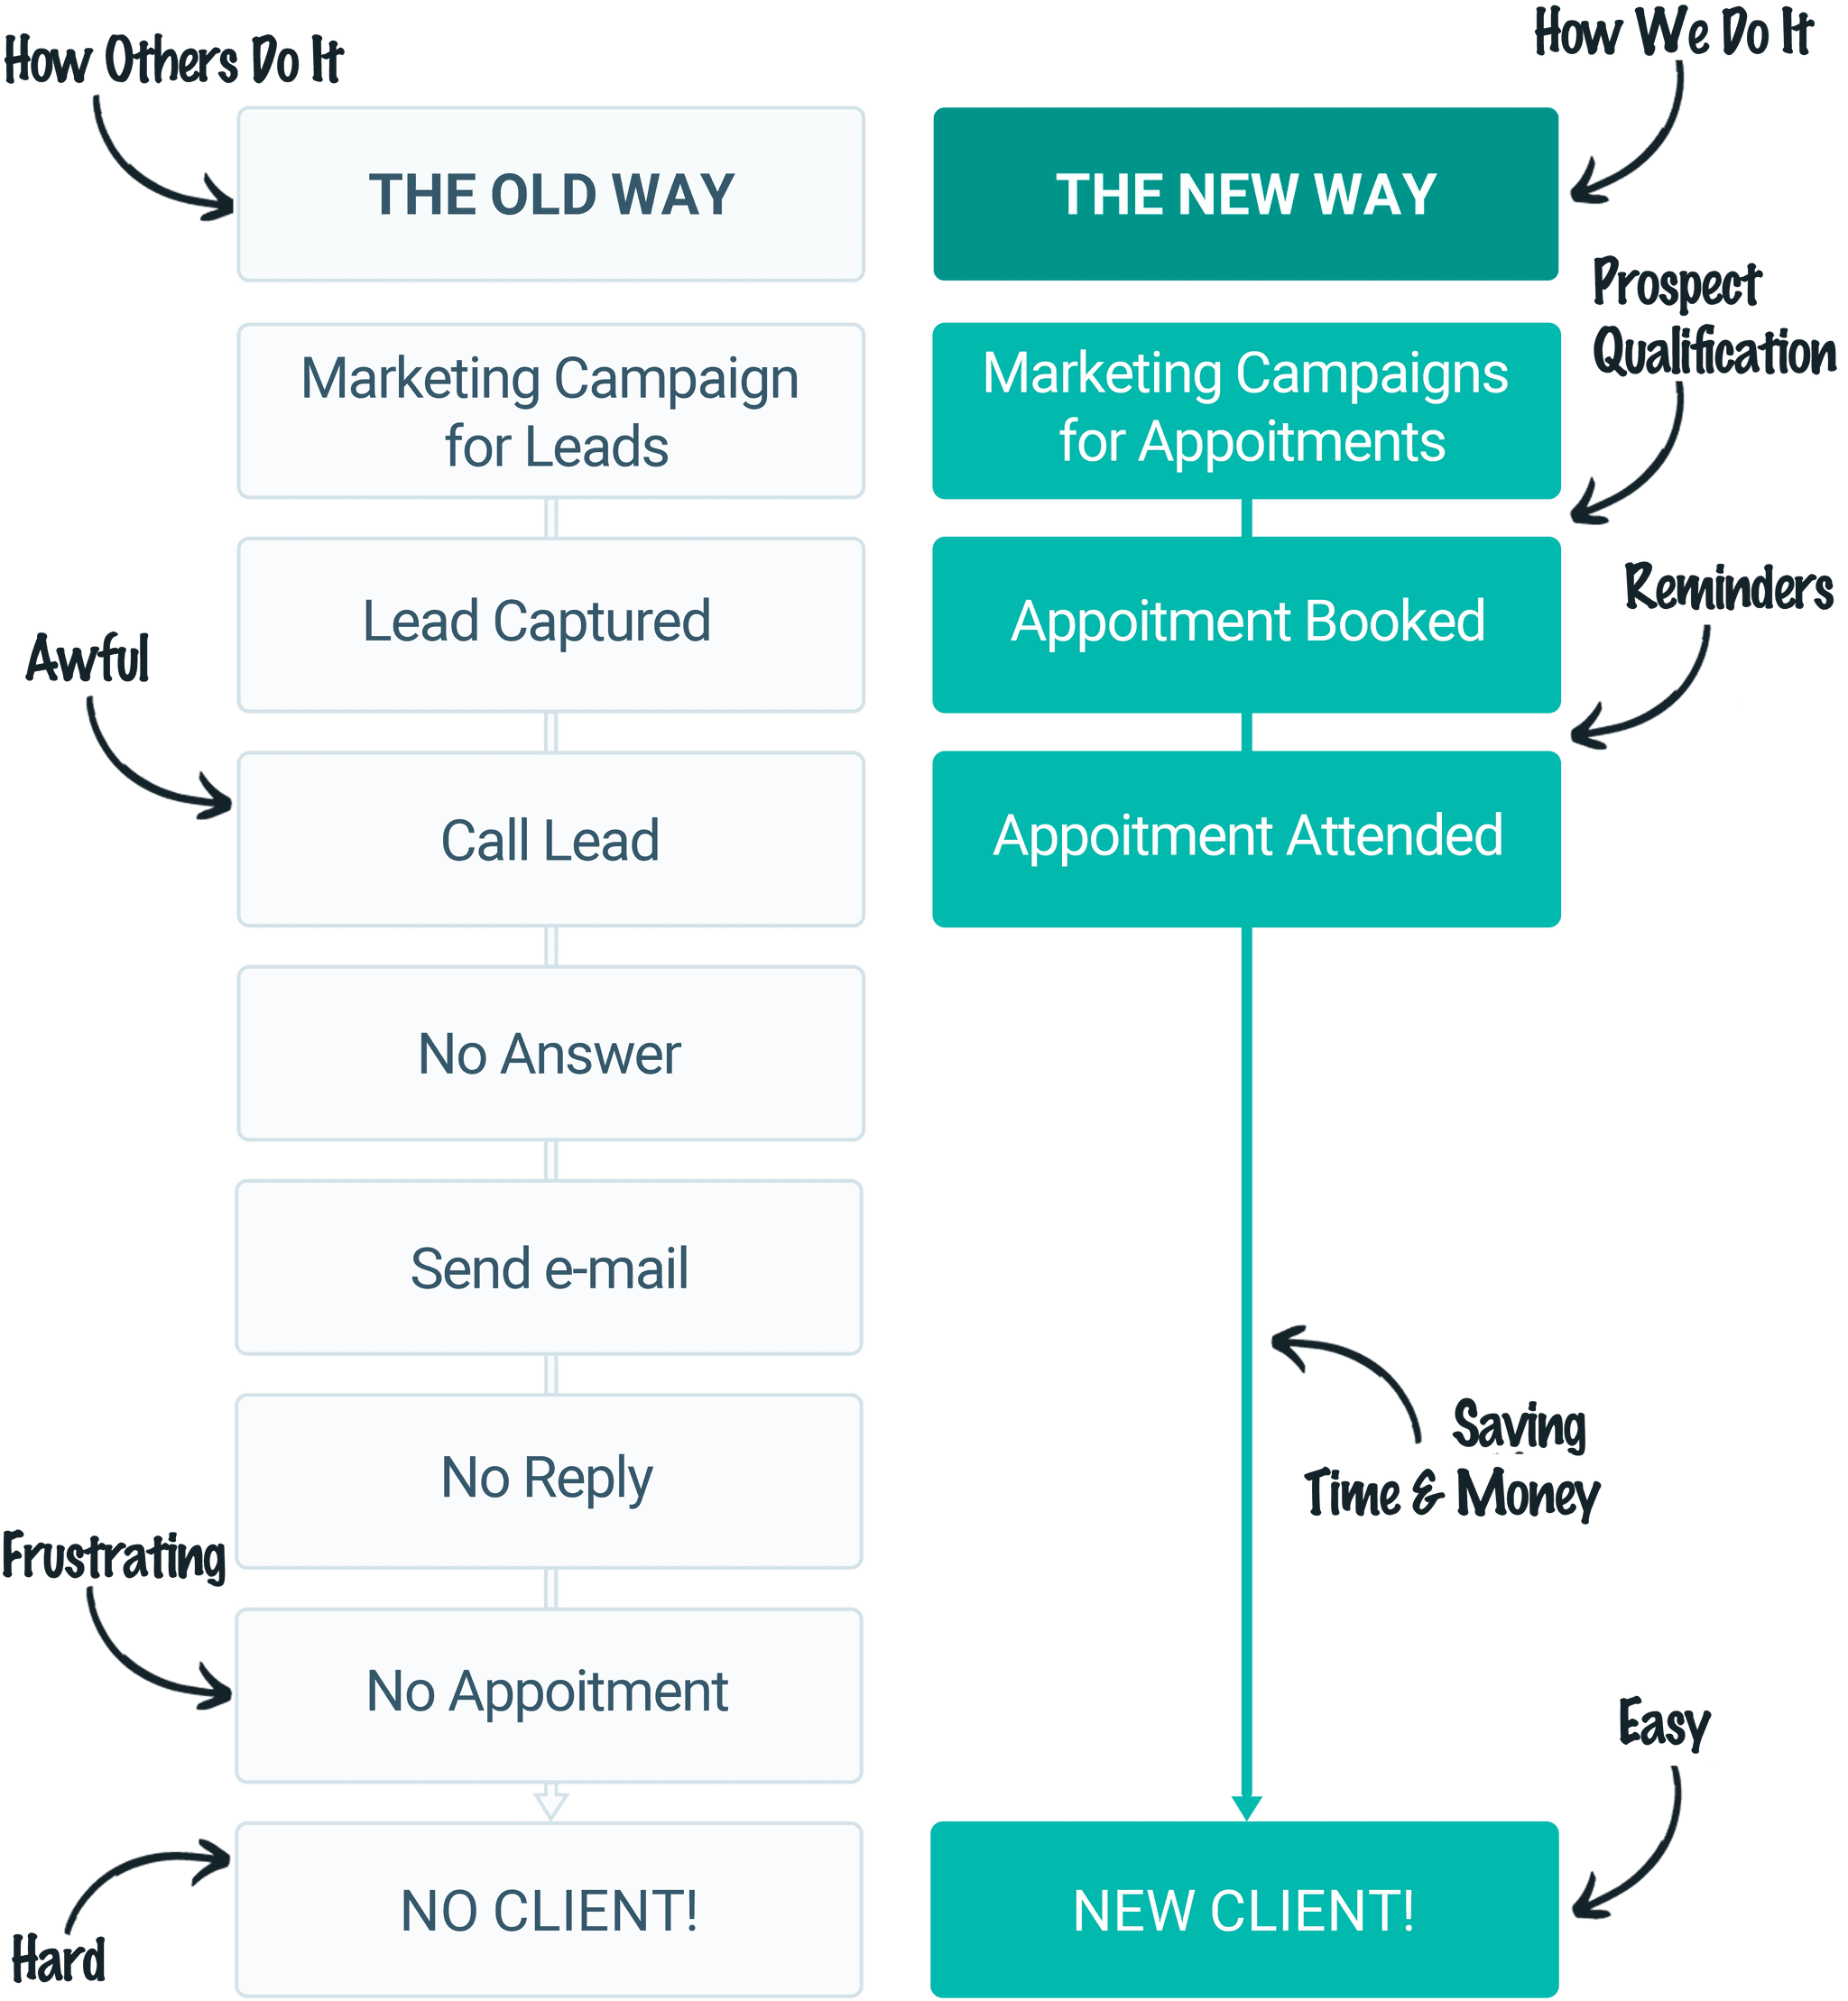 The Old Way vs. The New Way